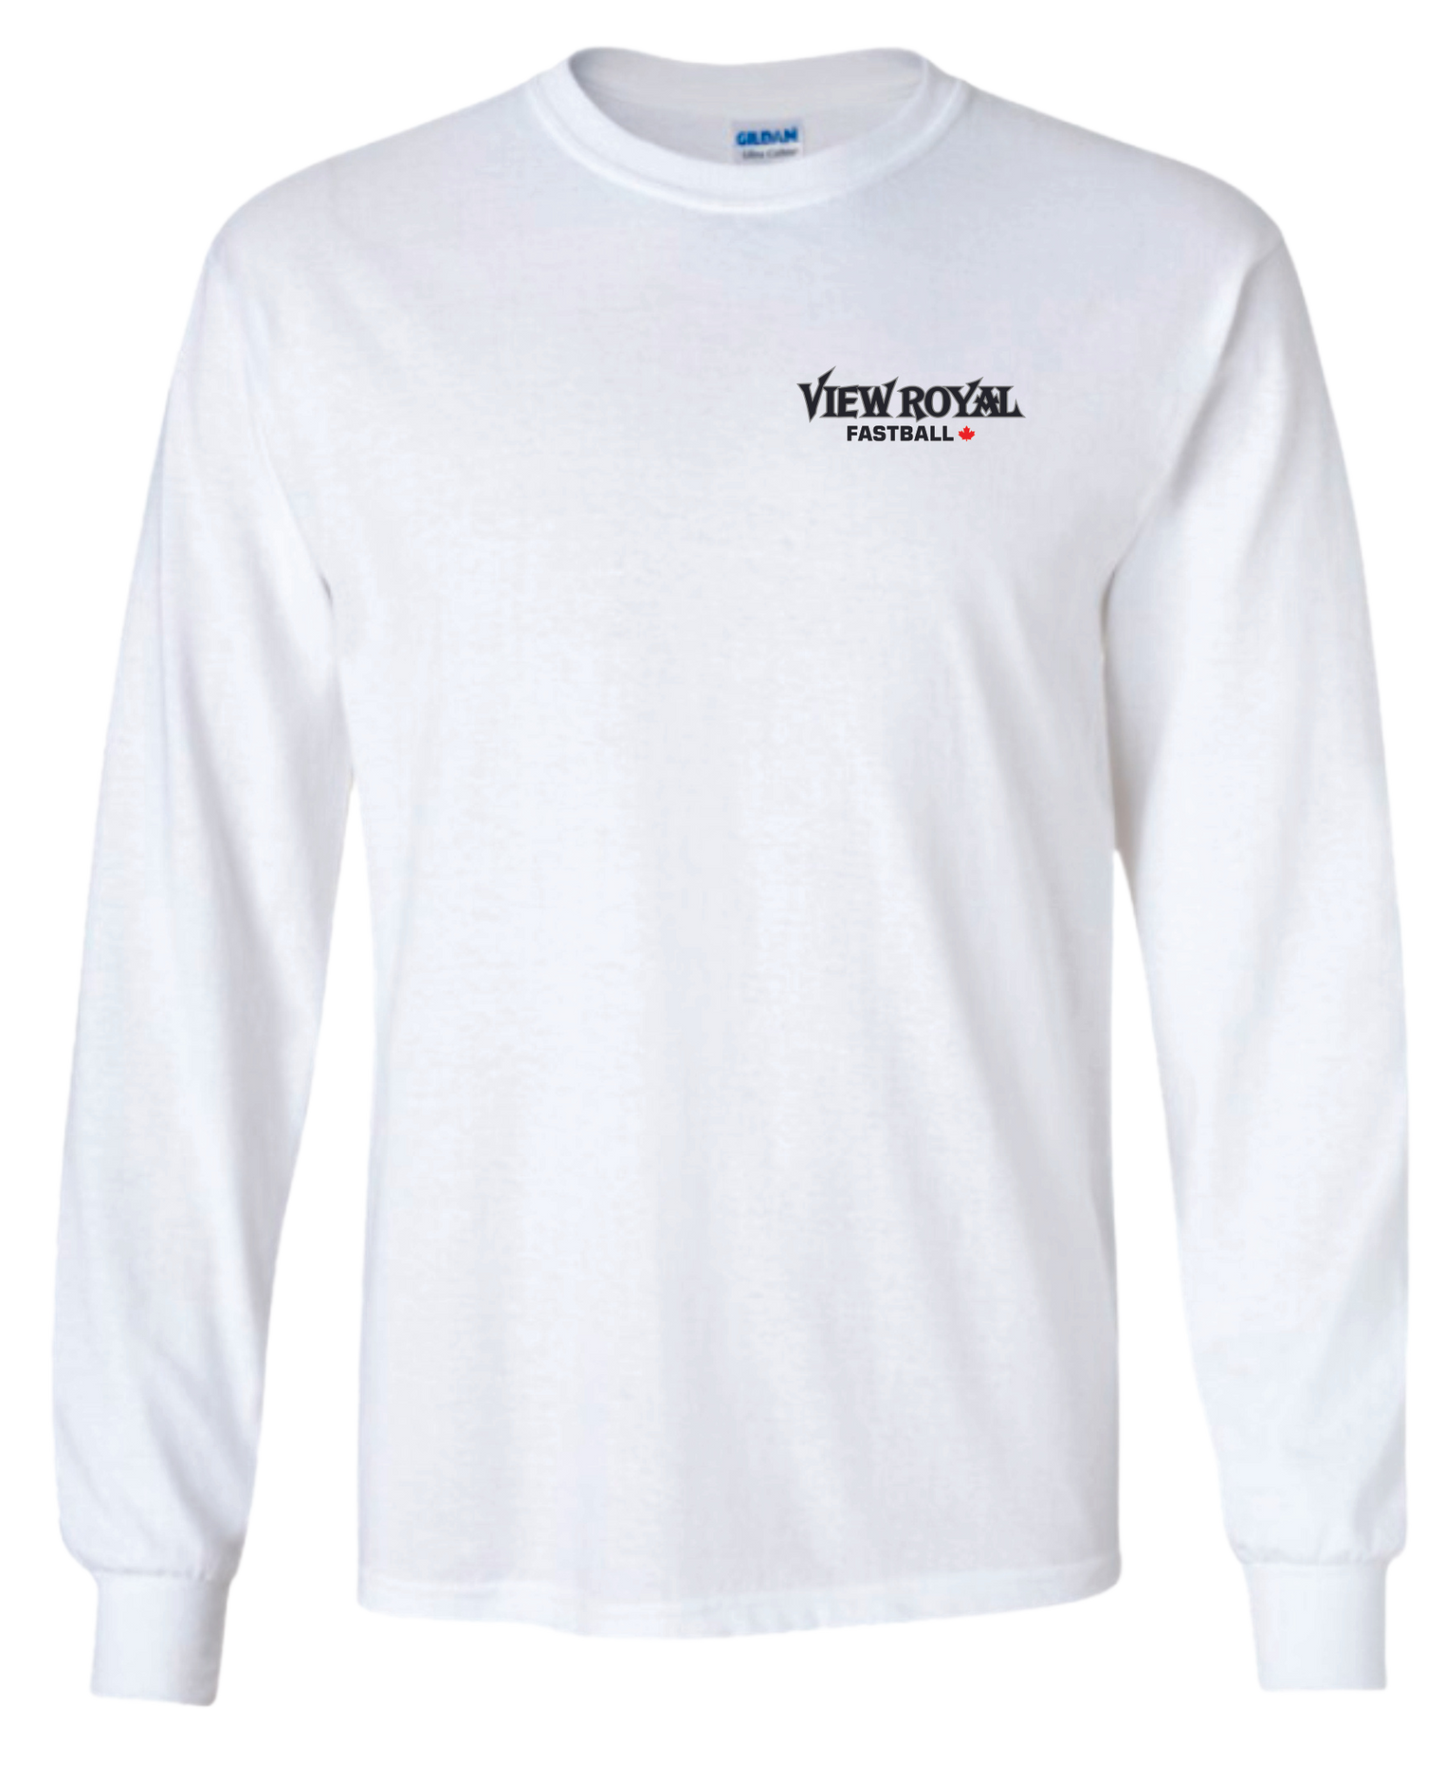 View Royal Fastball Unisex and Youth Cotton Long Sleeve Tshirts